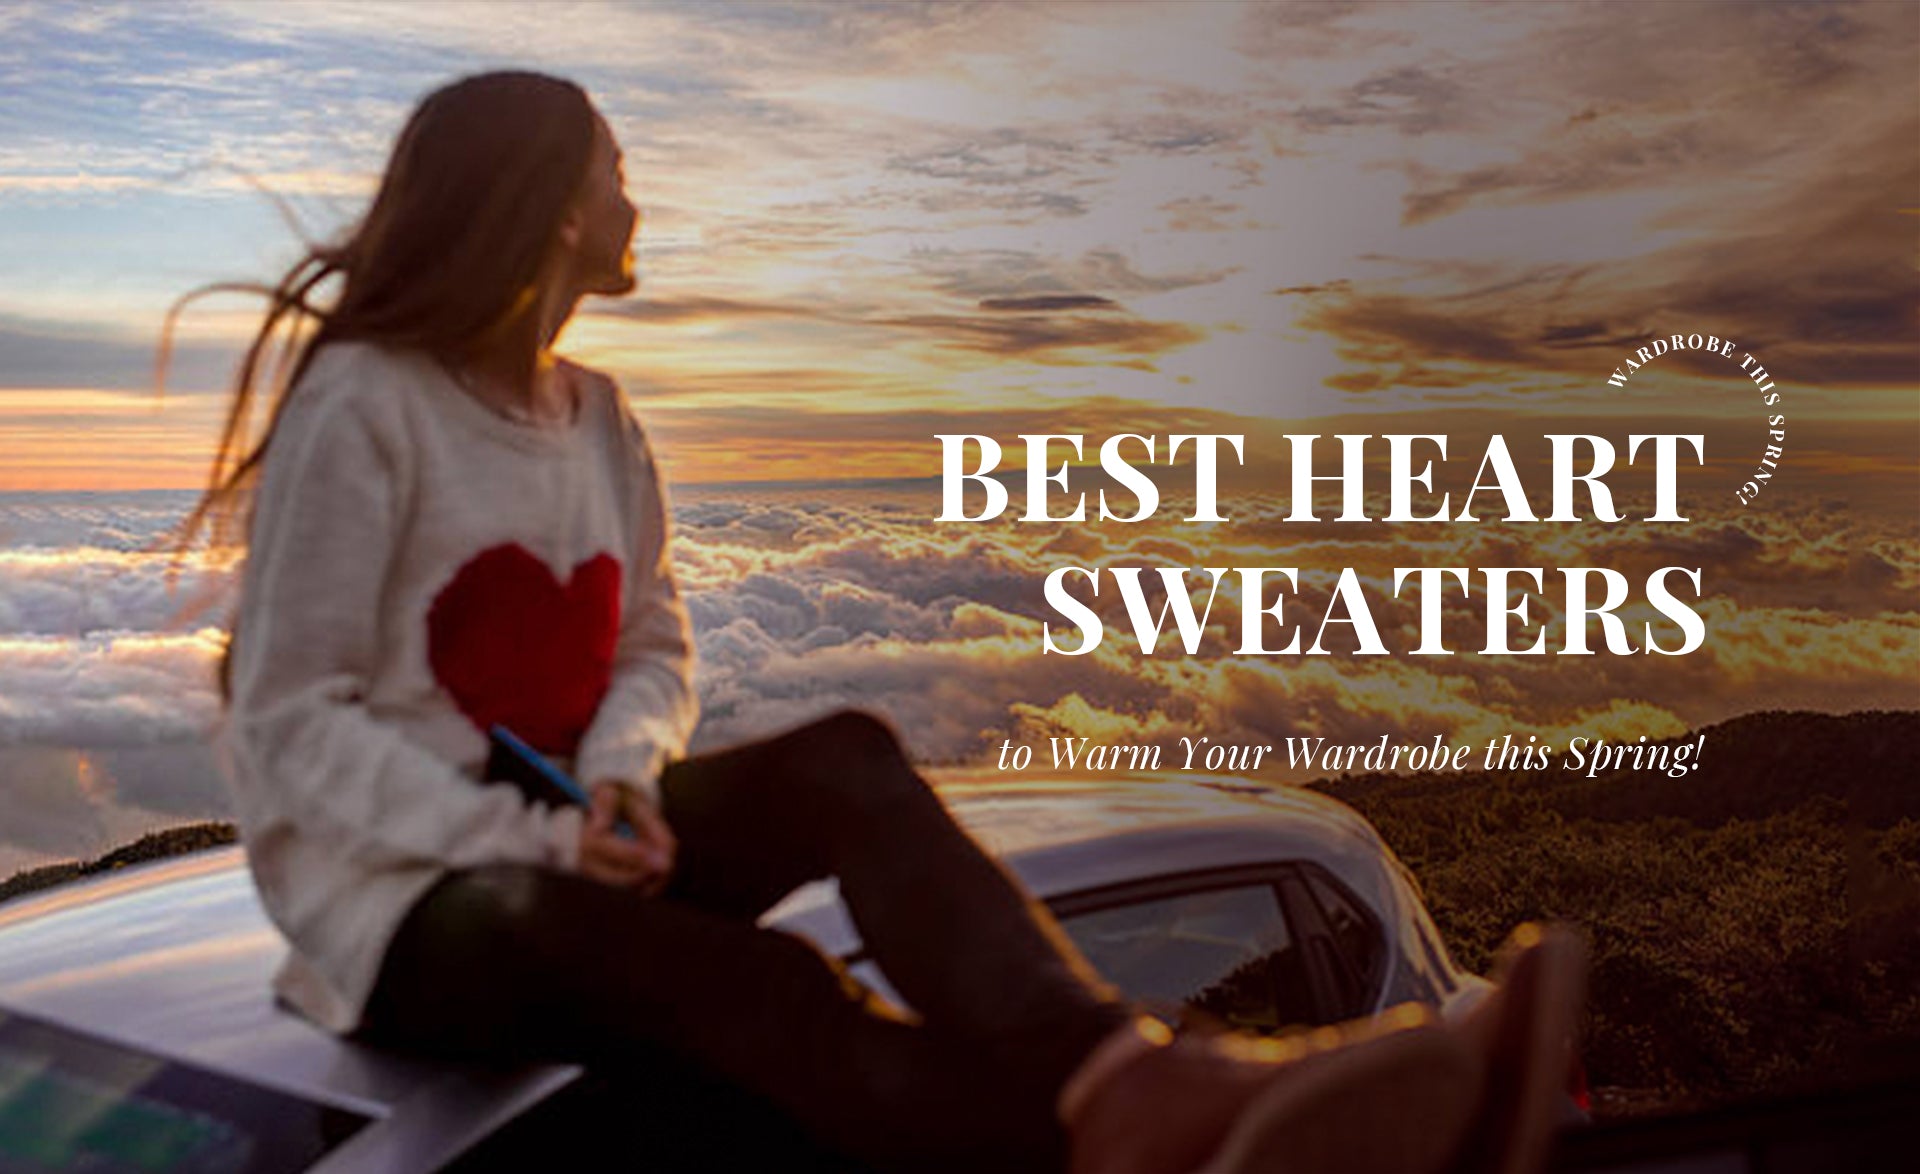 7 Best Heart Sweaters to Warm Your Wardrobe this Spring!